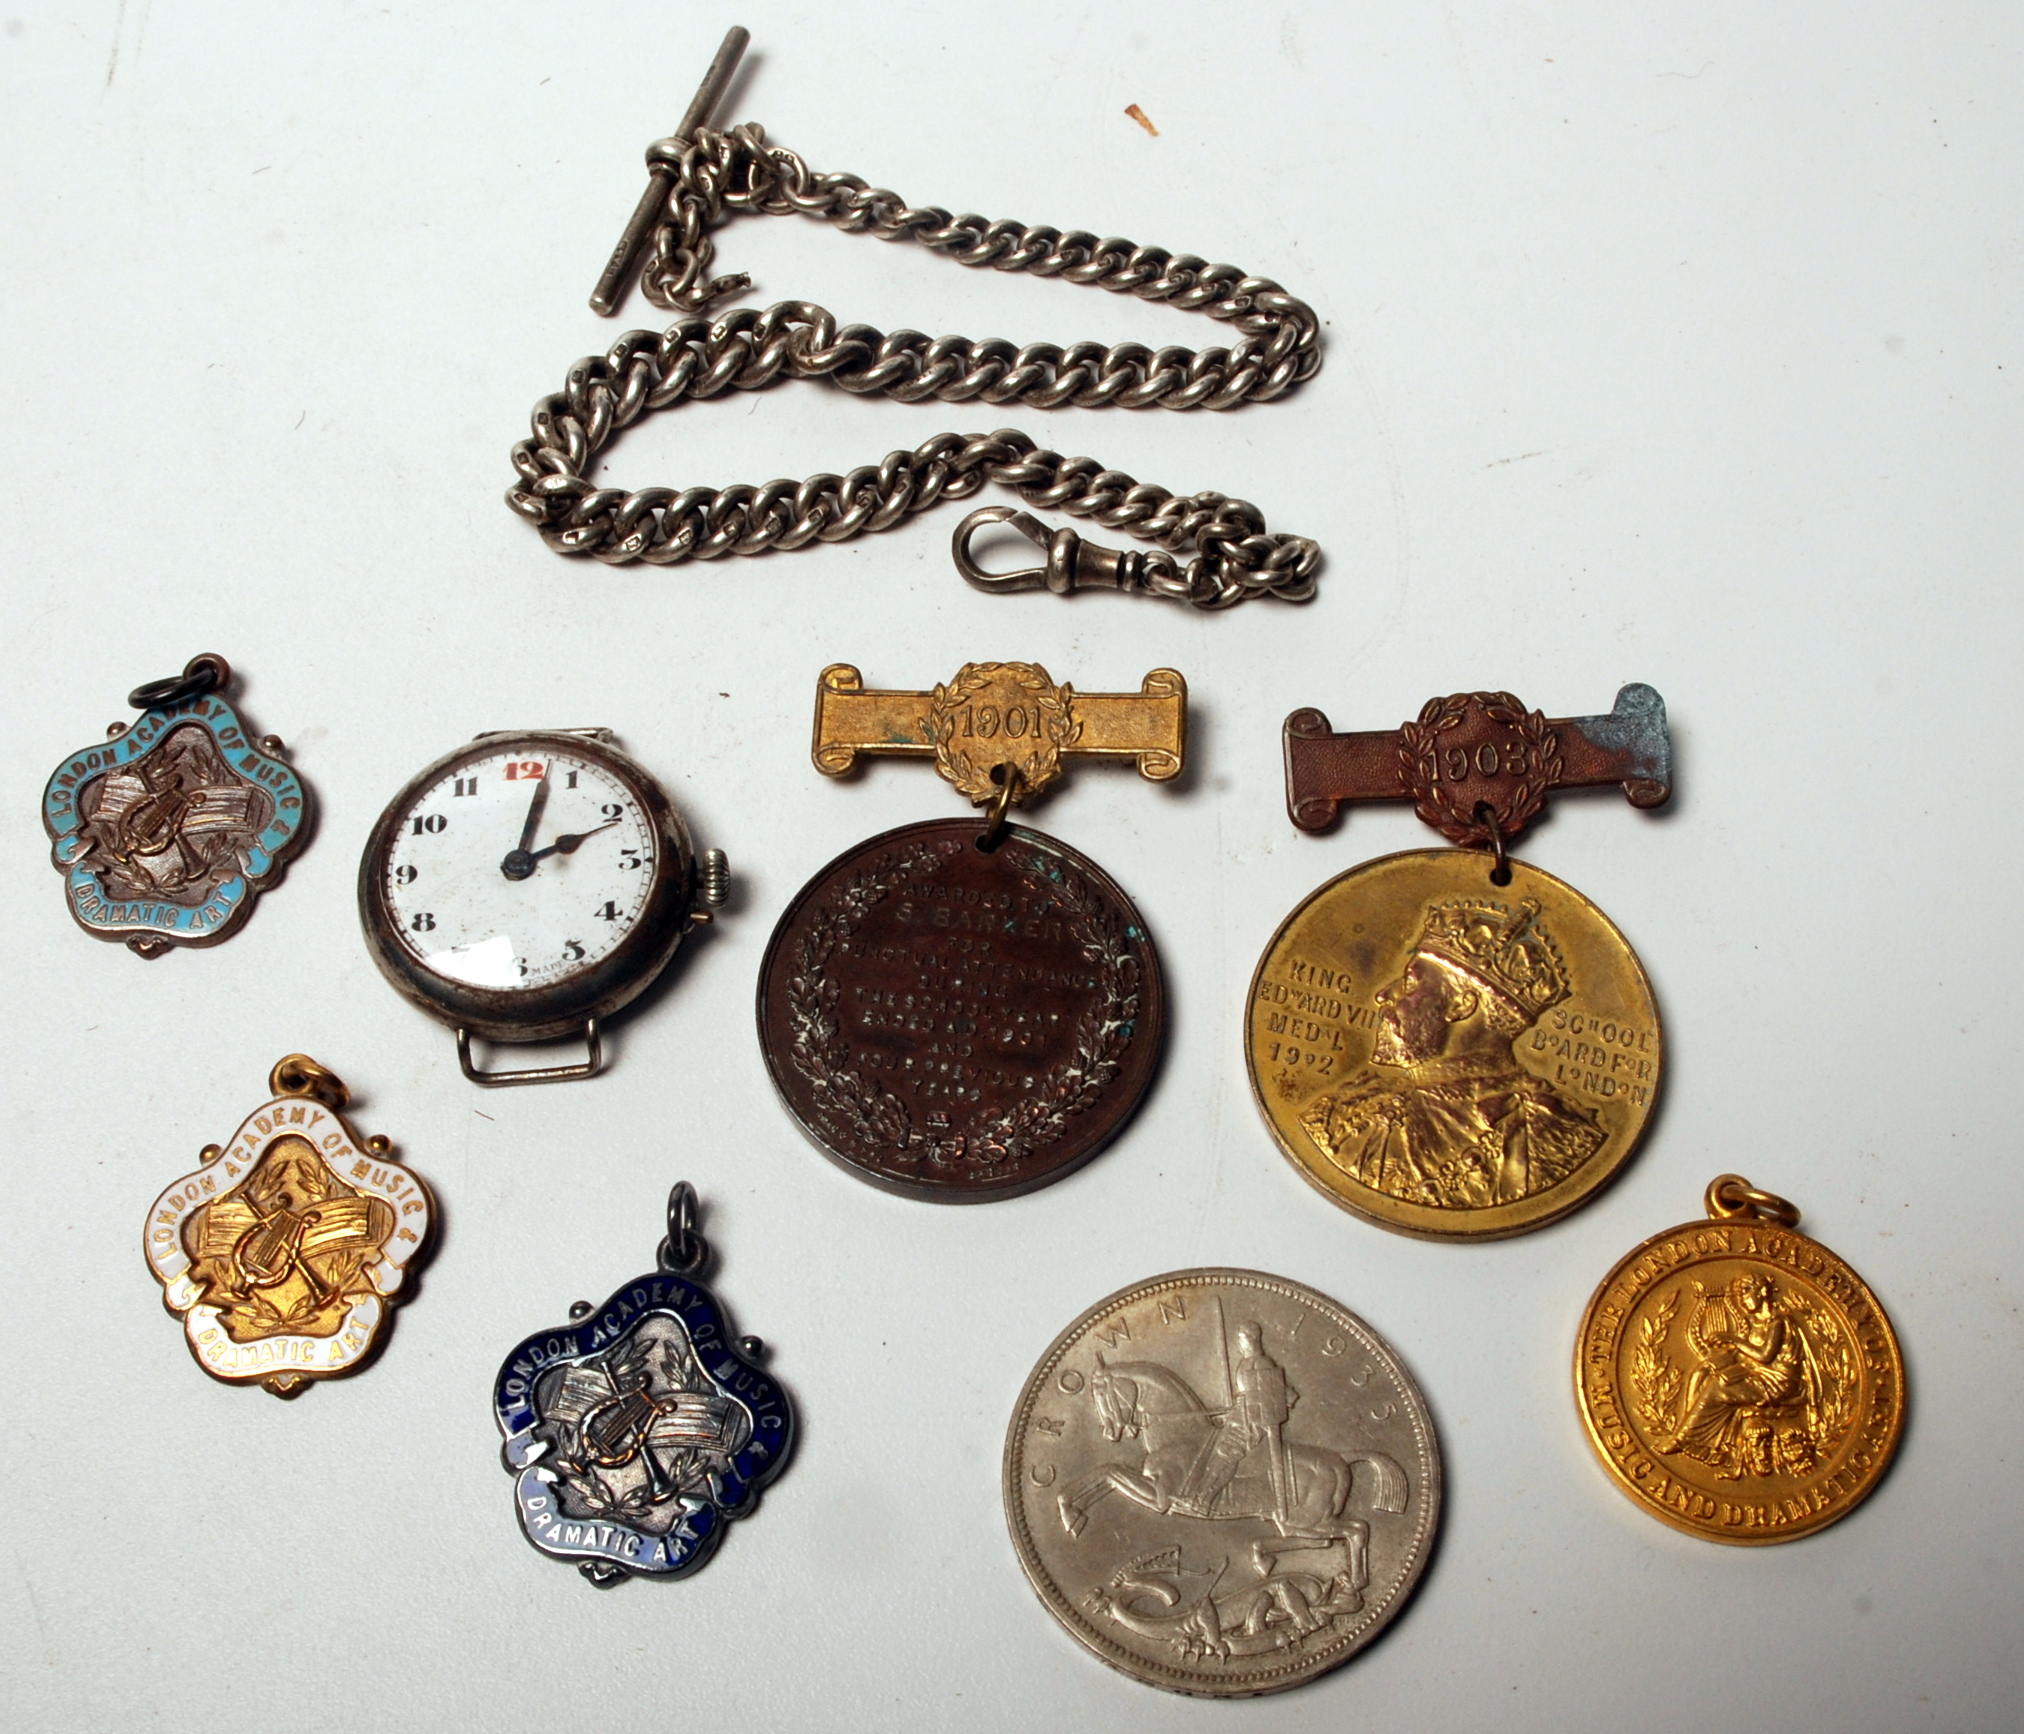 A 1935 crown, a silver watch chain, school medals and a trench watch.